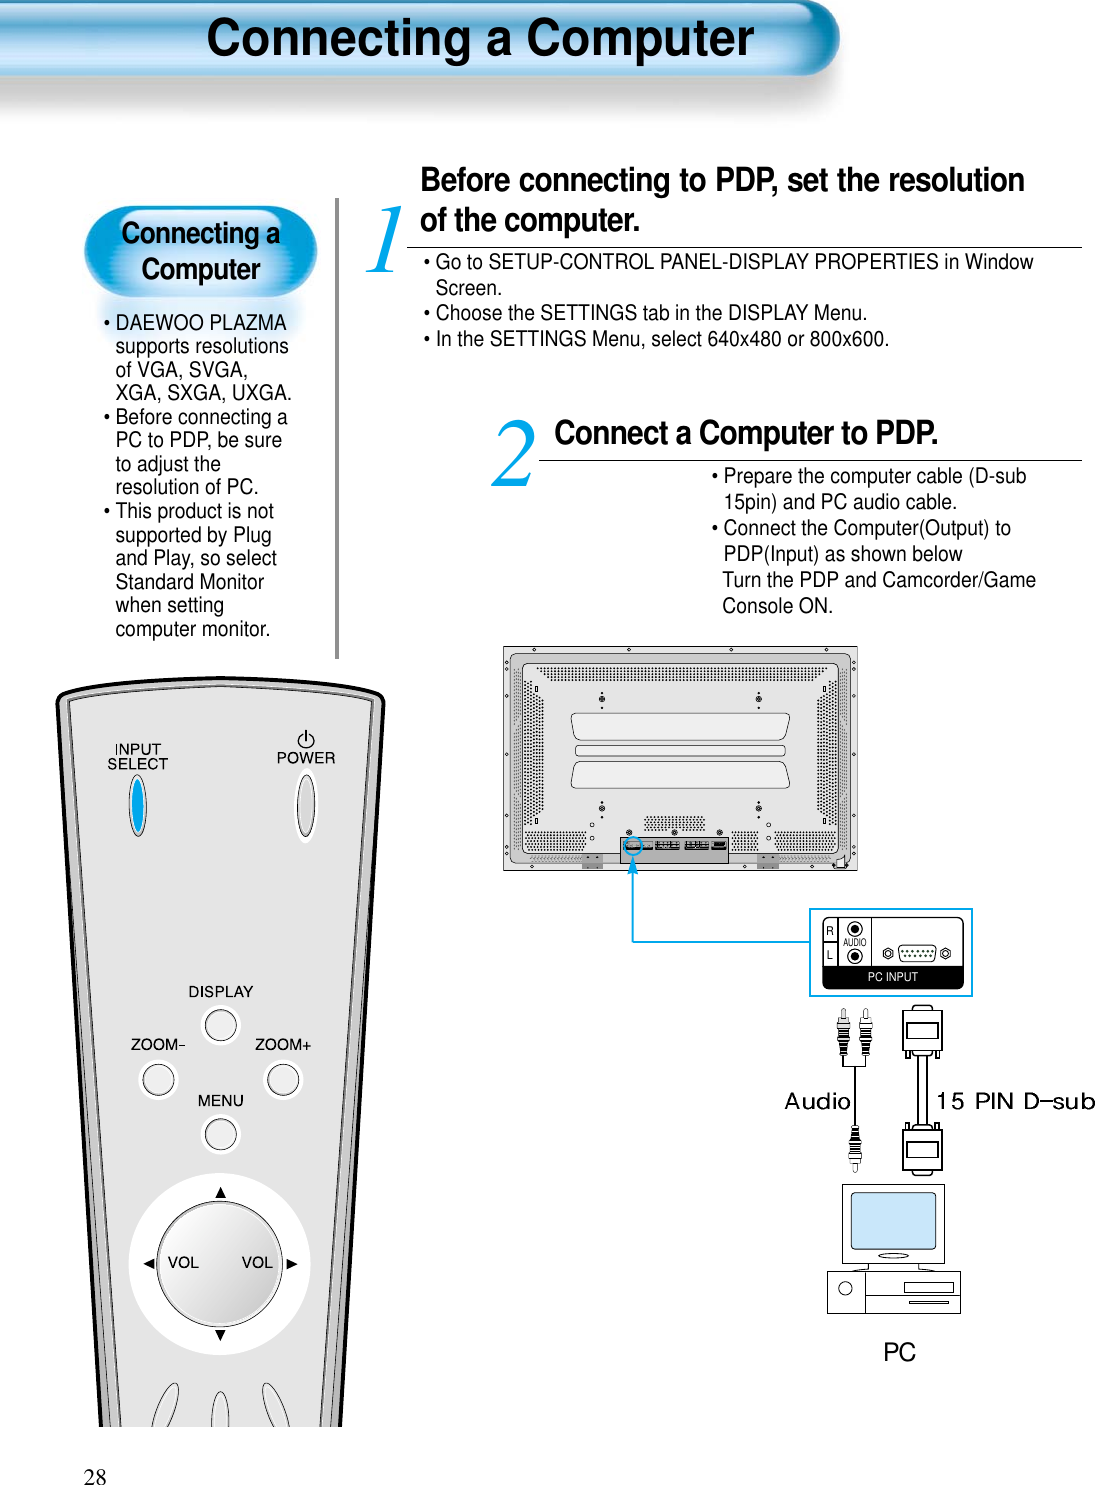 Connecting aComputer• DAEWOO PLAZMAsupports resolutionsof VGA, SVGA,XGA, SXGA, UXGA.• Before connecting aPC to PDP, be sureto adjust theresolution of PC.• This product is notsupported by Plugand Play, so selectStandard Monitorwhen settingcomputer monitor.Connecting a Computer28Connect a Computer to PDP.• Prepare the computer cable (D-sub15pin) and PC audio cable.• Connect the Computer(Output) toPDP(Input) as shown below Turn the PDP and Camcorder/GameConsole ON.2Before connecting to PDP, set the resolutionof the computer.• Go to SETUP-CONTROL PANEL-DISPLAY PROPERTIES in WindowScreen.• Choose the SETTINGS tab in the DISPLAY Menu.• In the SETTINGS Menu, select 640x480 or 800x600.1PC INPUTLRAUDIOPC INPUT UPGRADE PORTDTV/DVD INPUT VIDEO INPUTSPEAKER(8 OHMS)RLLRAUDIOL- AUDIO -R L- AUDIO -RVIDEOS-VIDEOPC